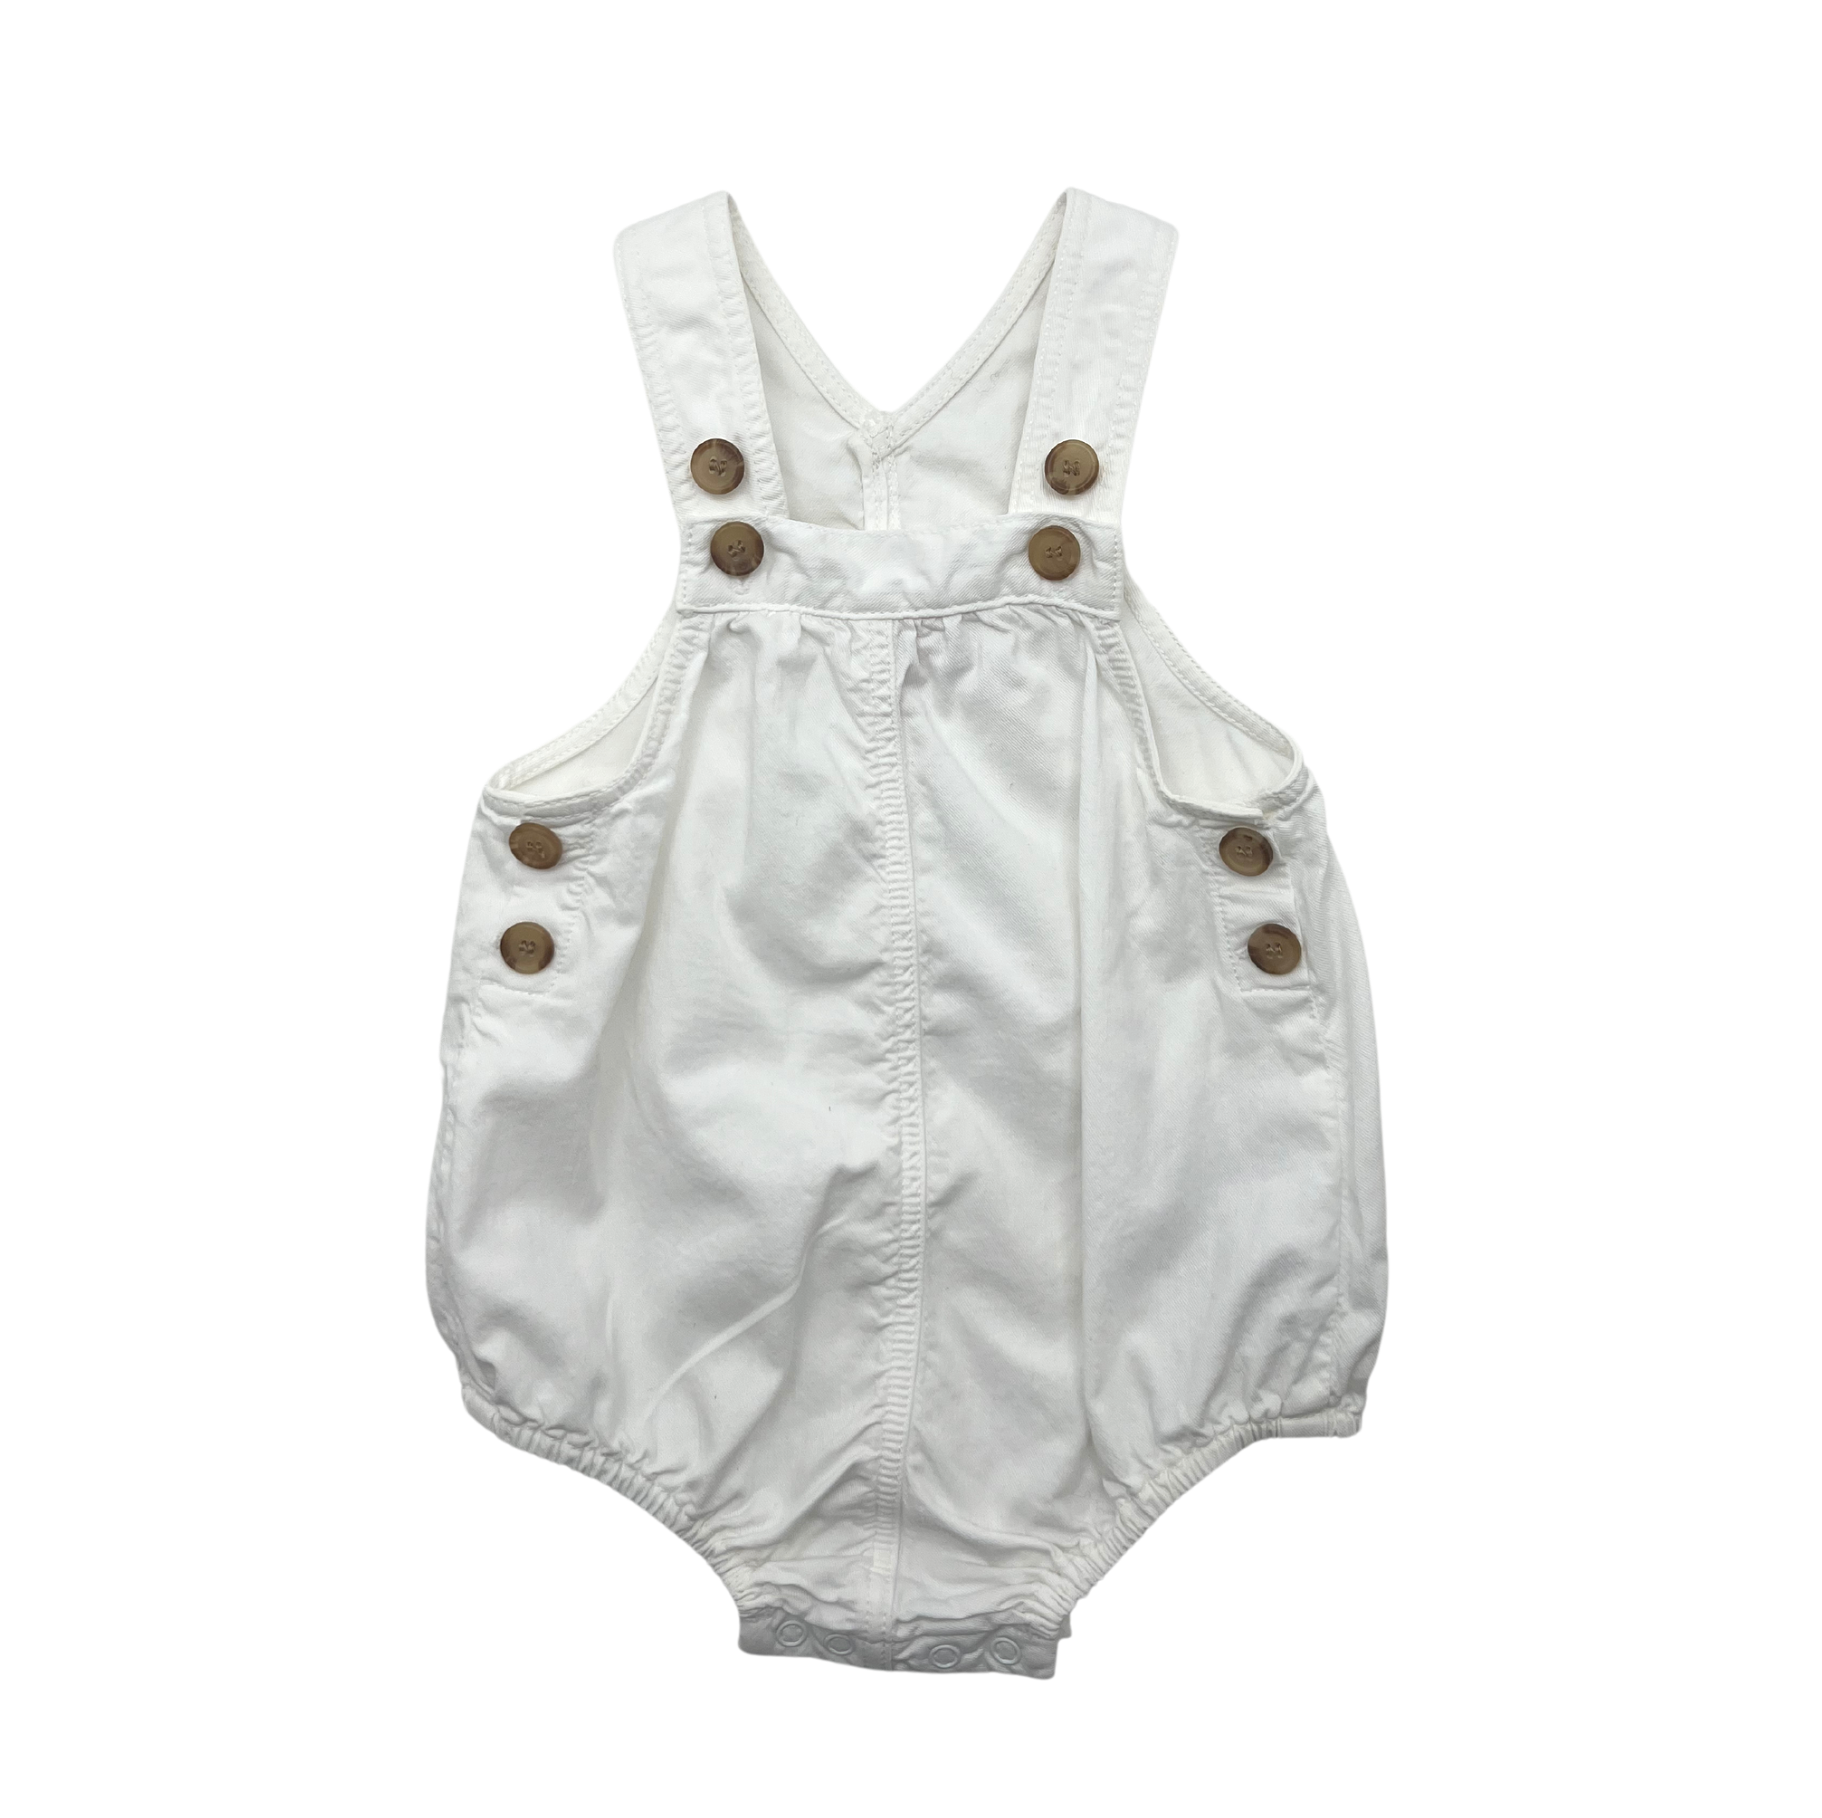 BONPOINT - Dungarees - 1 year